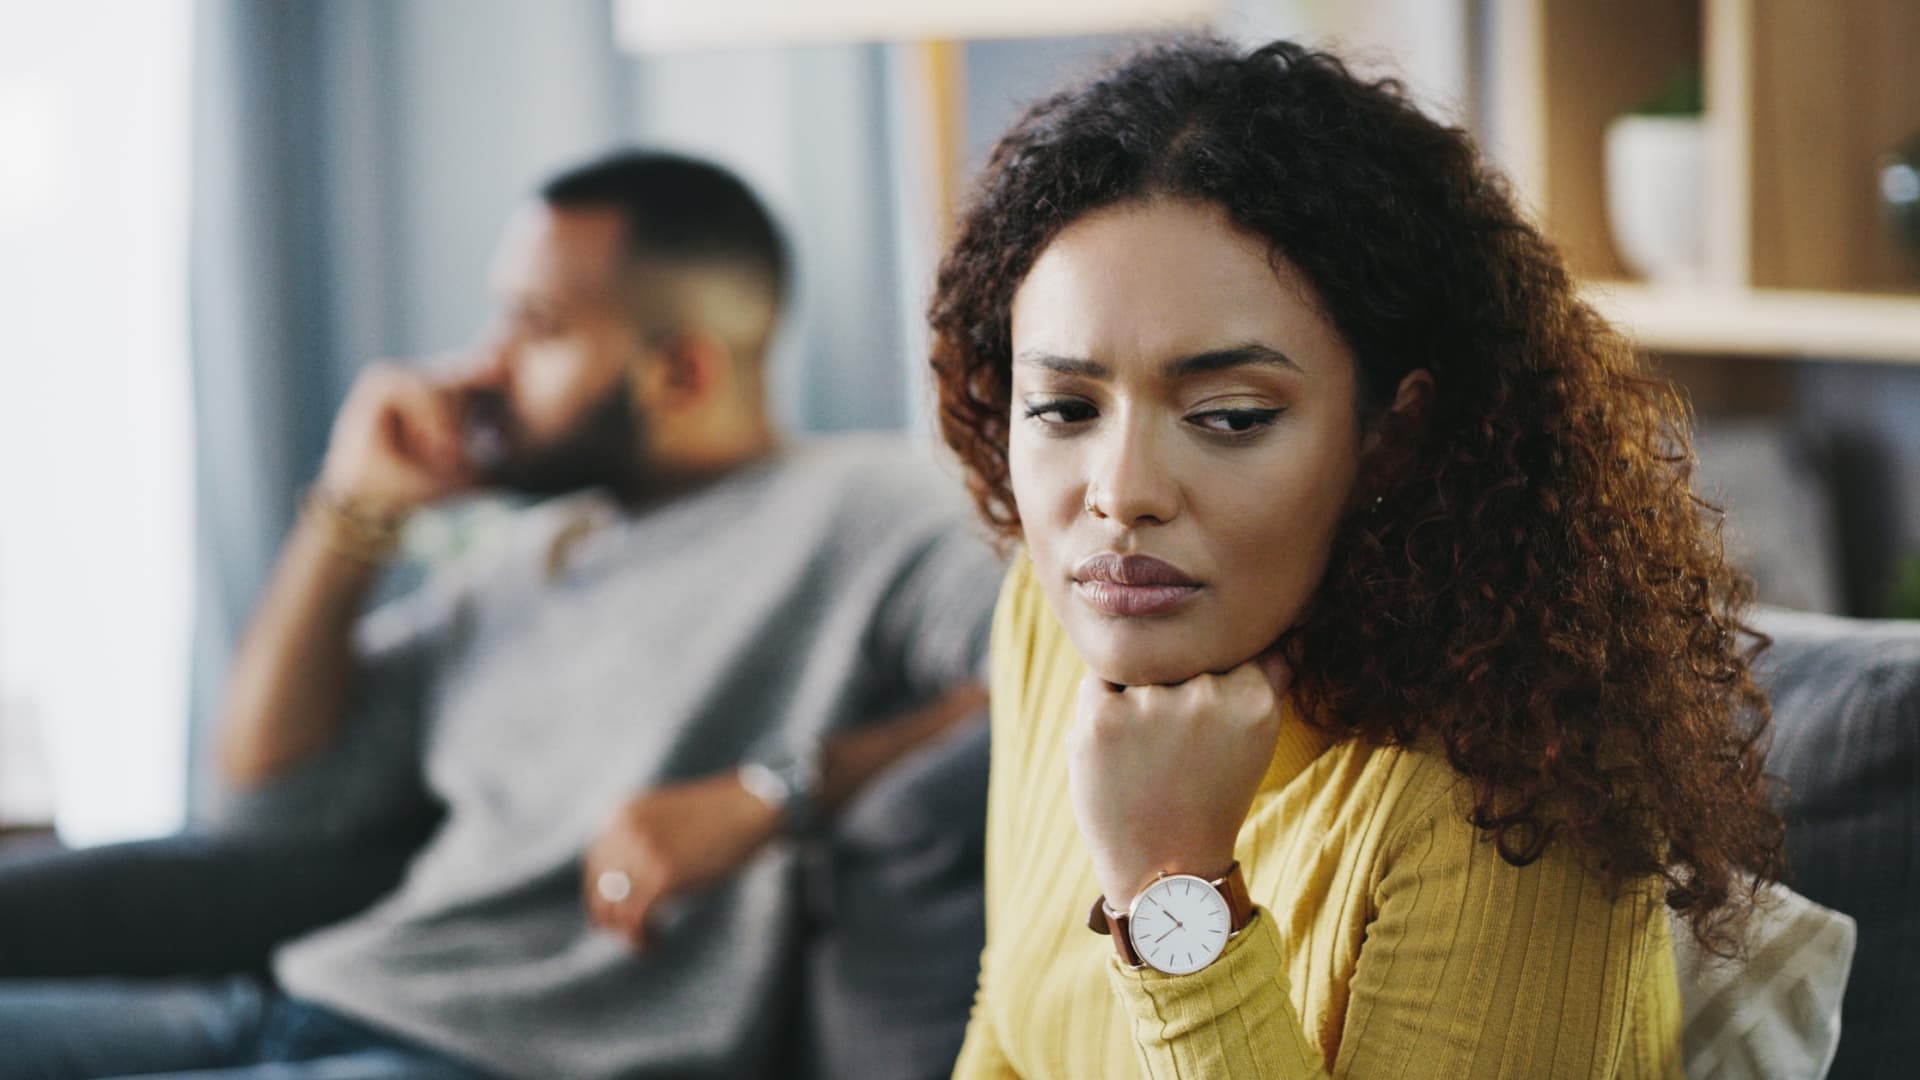 4 ‘red flags’ that might mean your relationship is in trouble